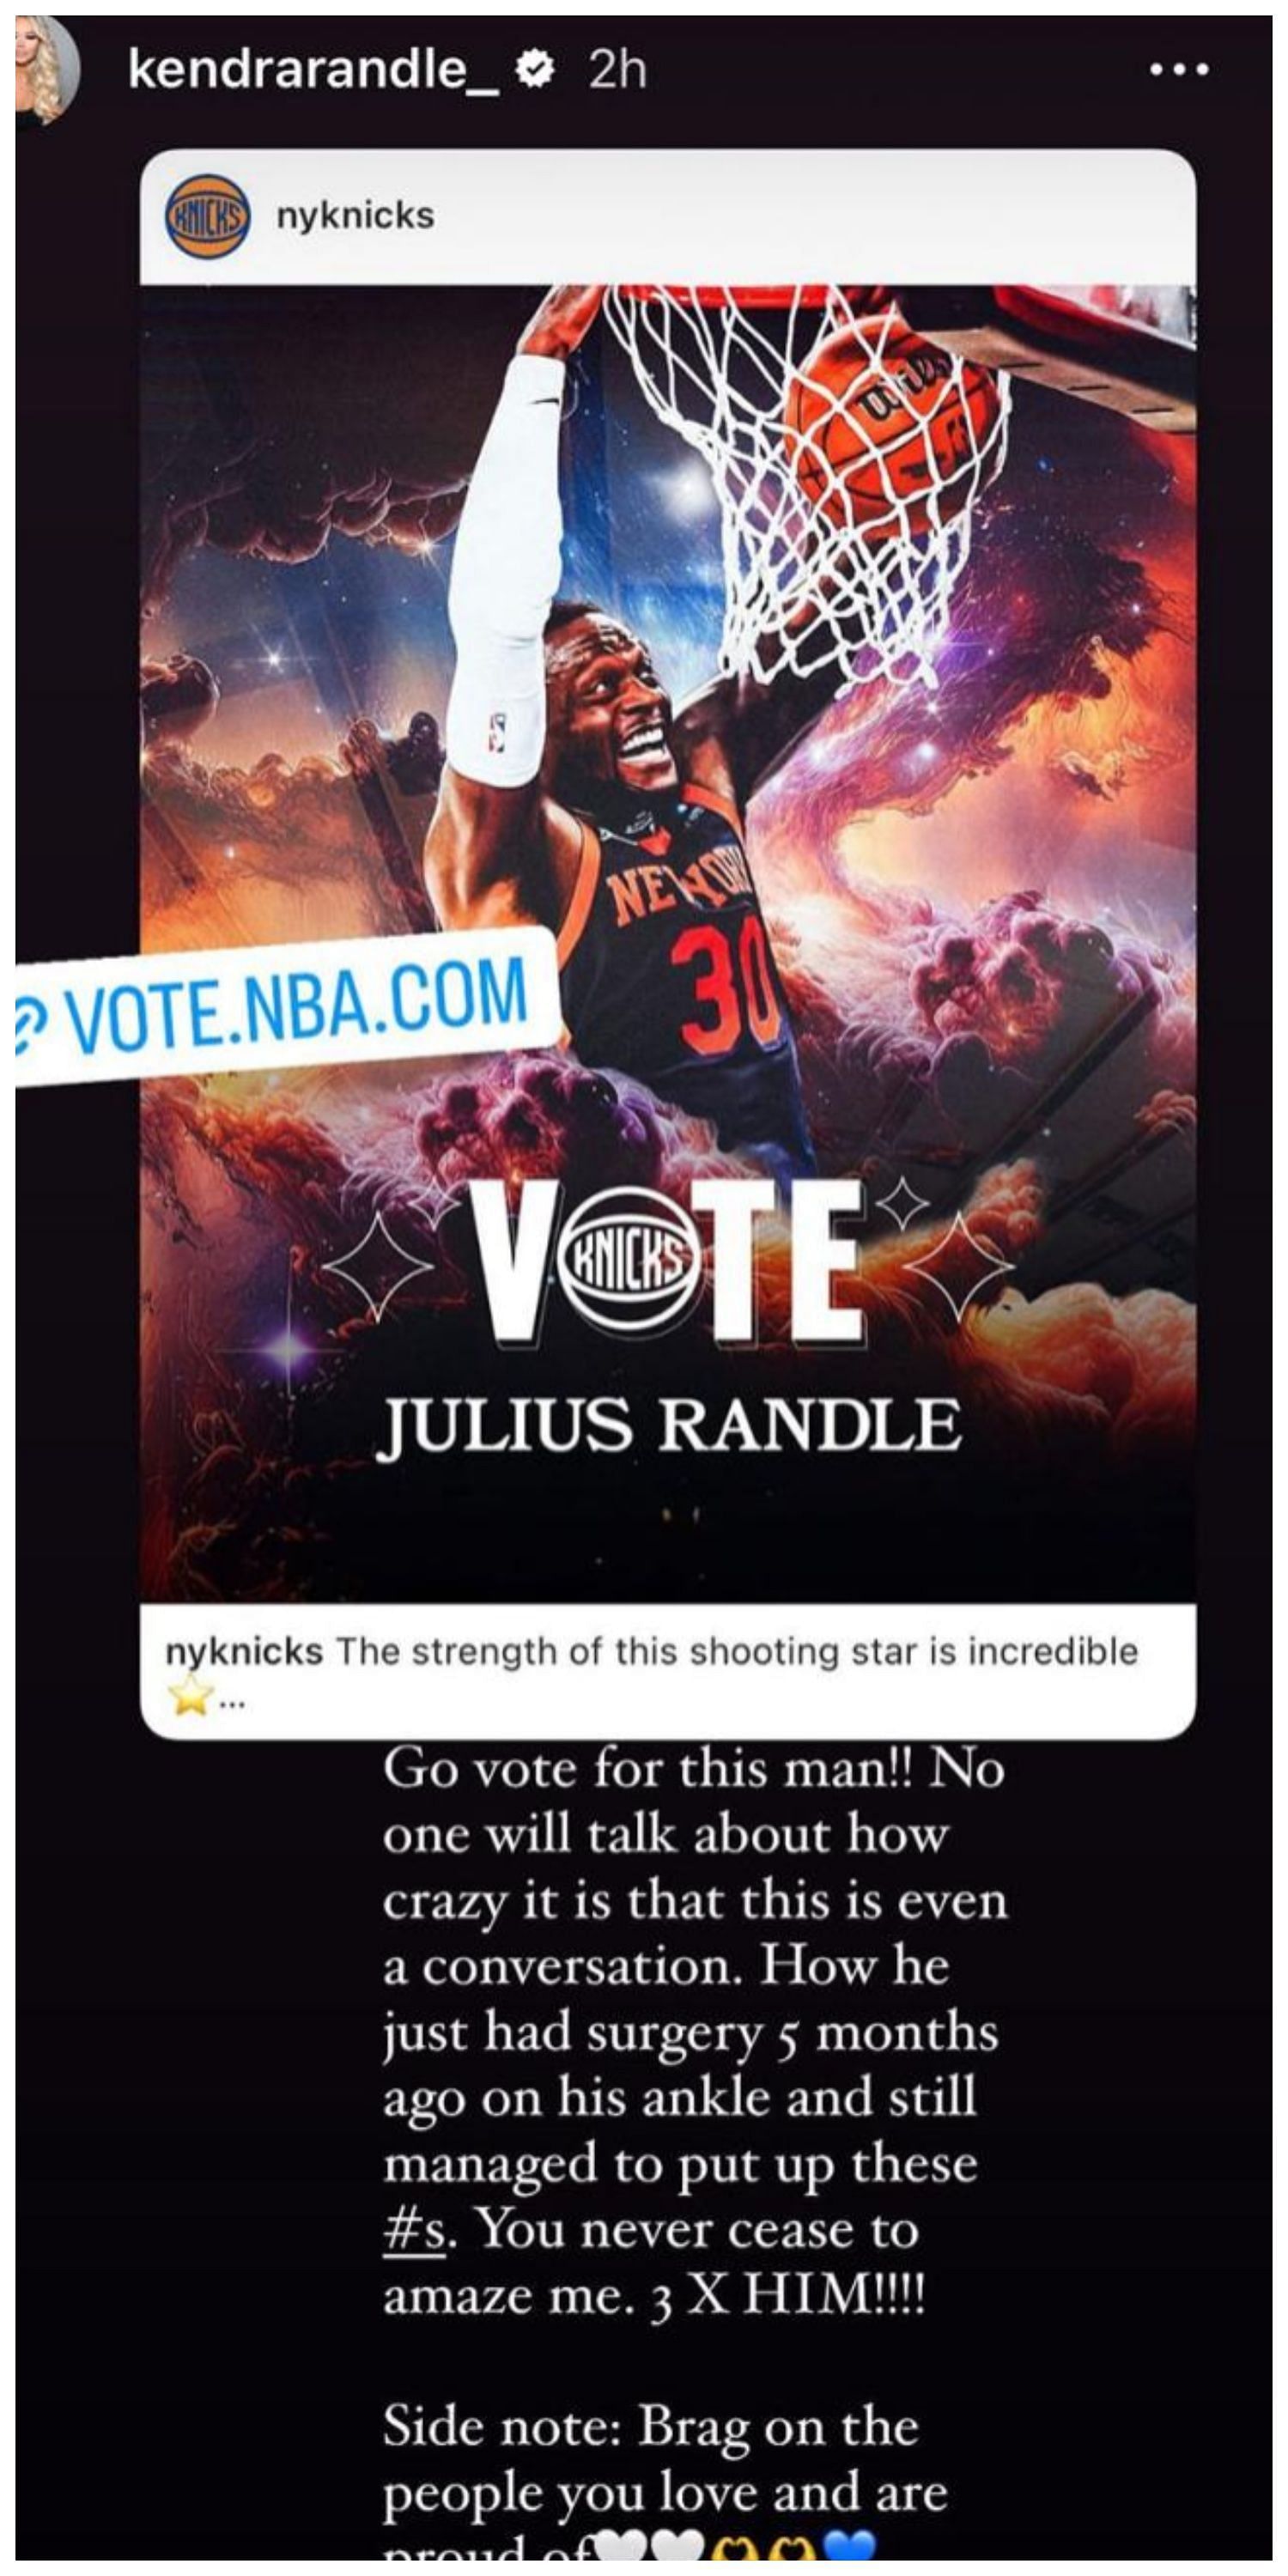 Kendra Randle calls fans to vote for Julius Randle&#039;s participation in the All-Star Game.